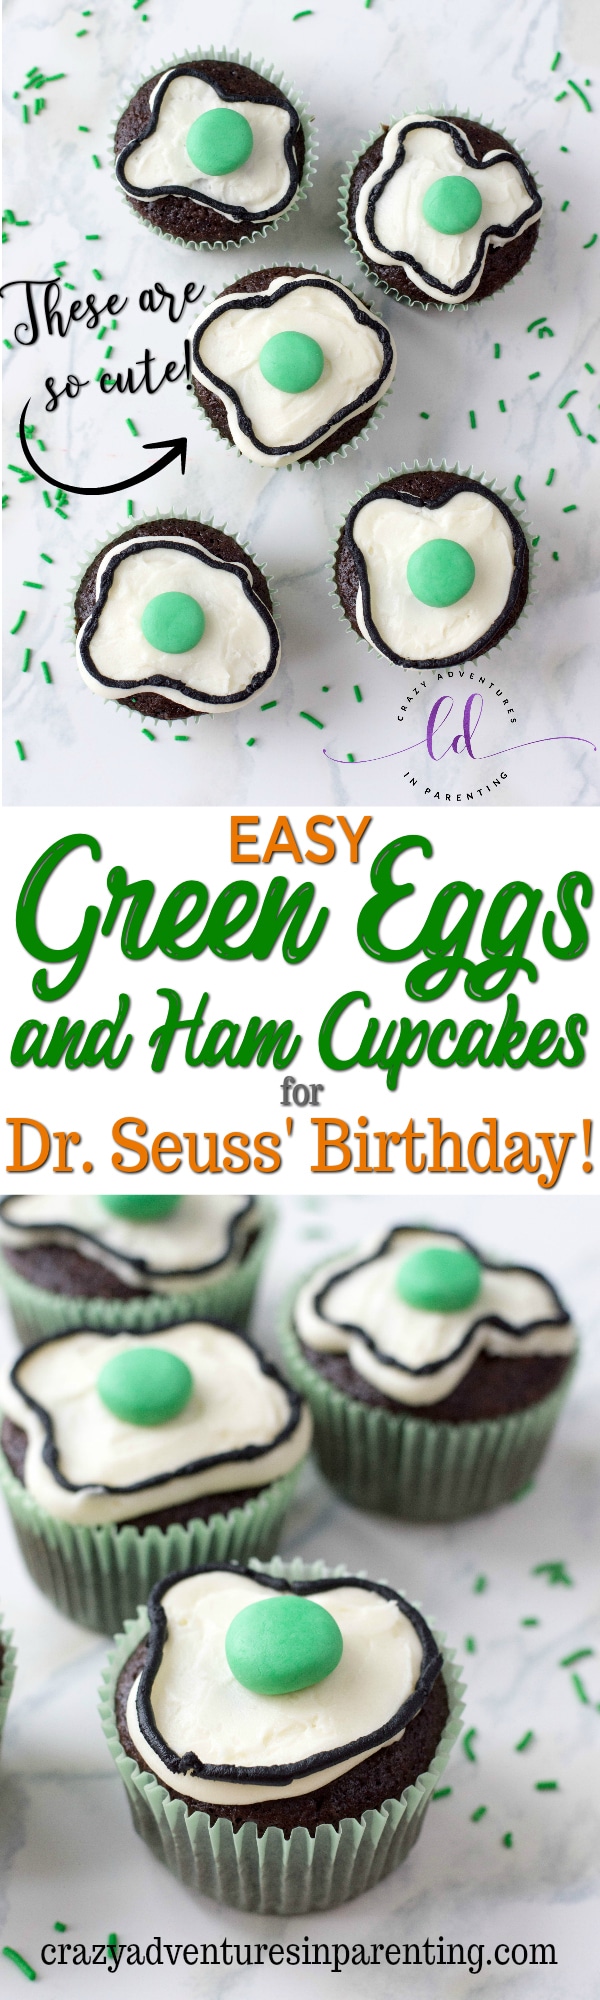 Easy Green Eggs and Ham Cupcakes for Dr. Seuss' Birthday